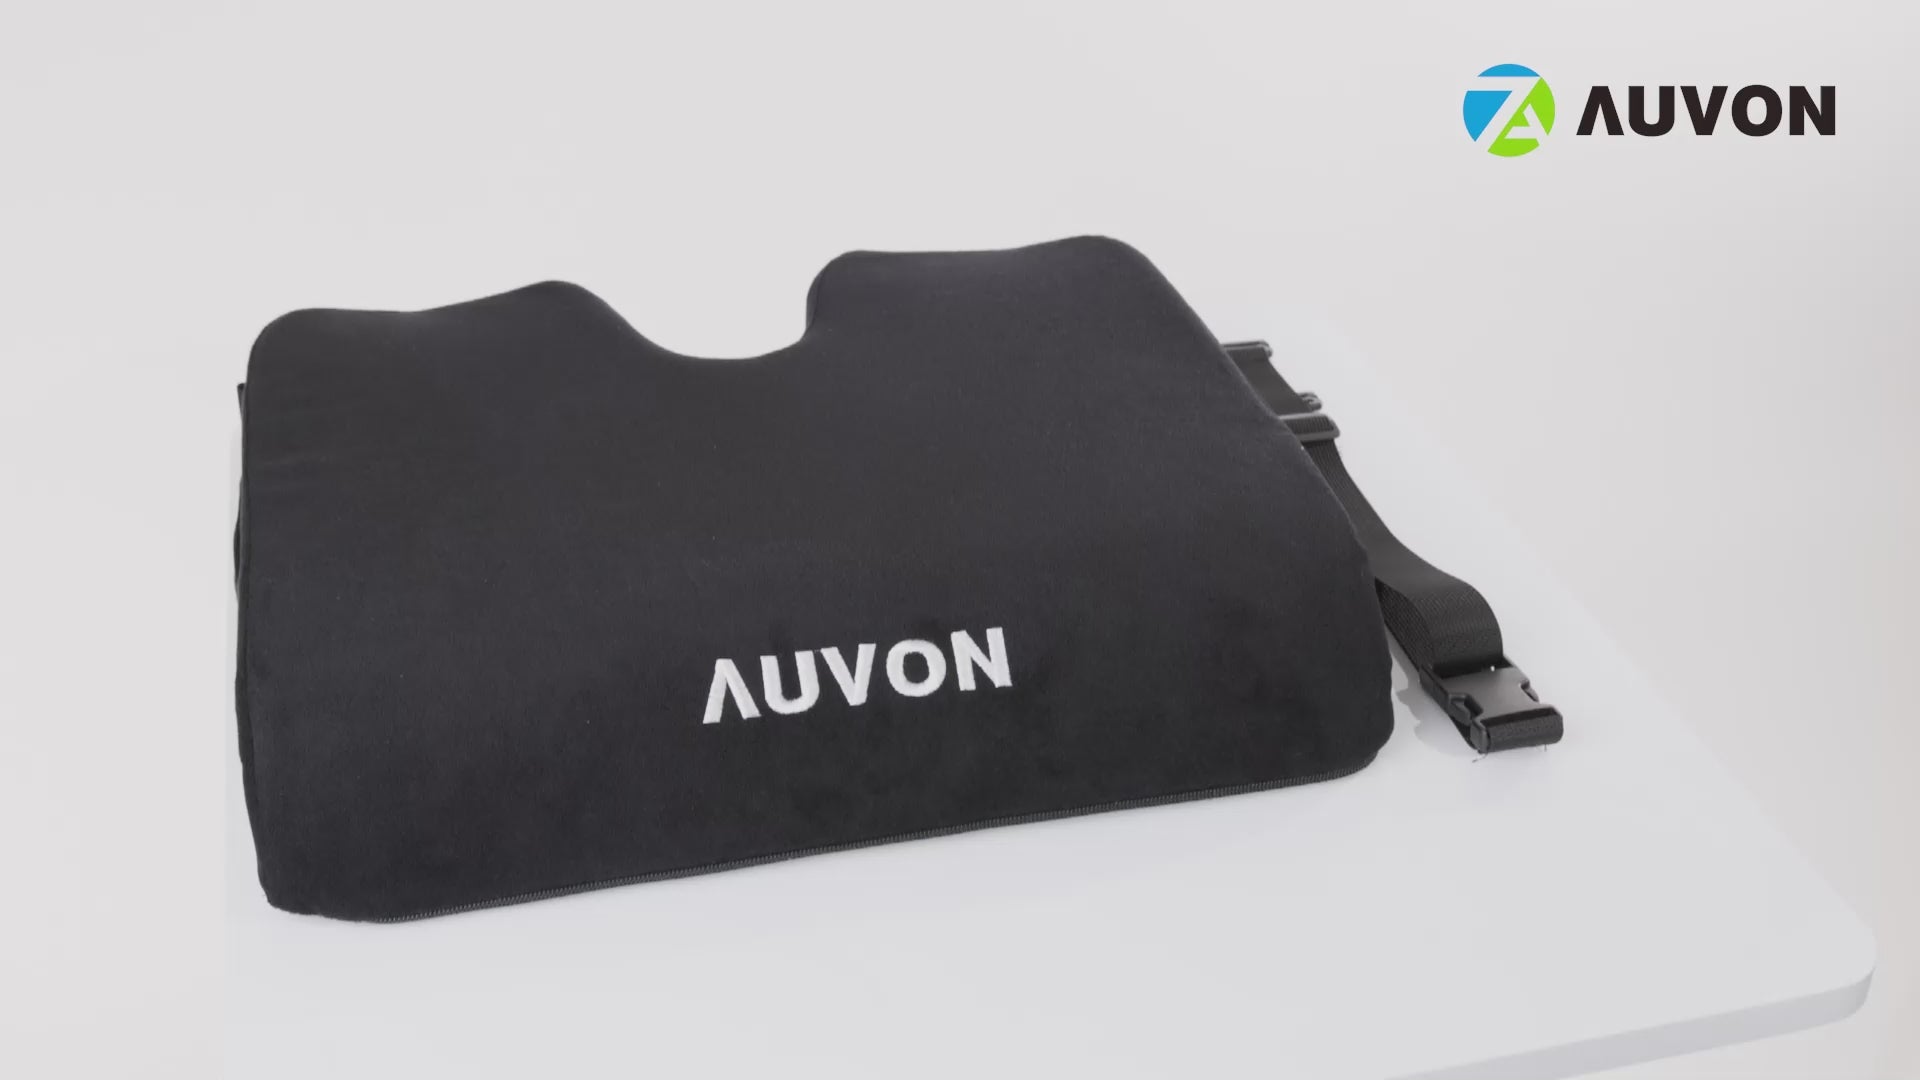 AUVON Wheelchair Seat Cushions (18 inchx16 inchx3 inch) for Sciatica, Back, Coccyx, Pressure Sore and Ulcer Pain Relief, Memory Foam Pressure Relief